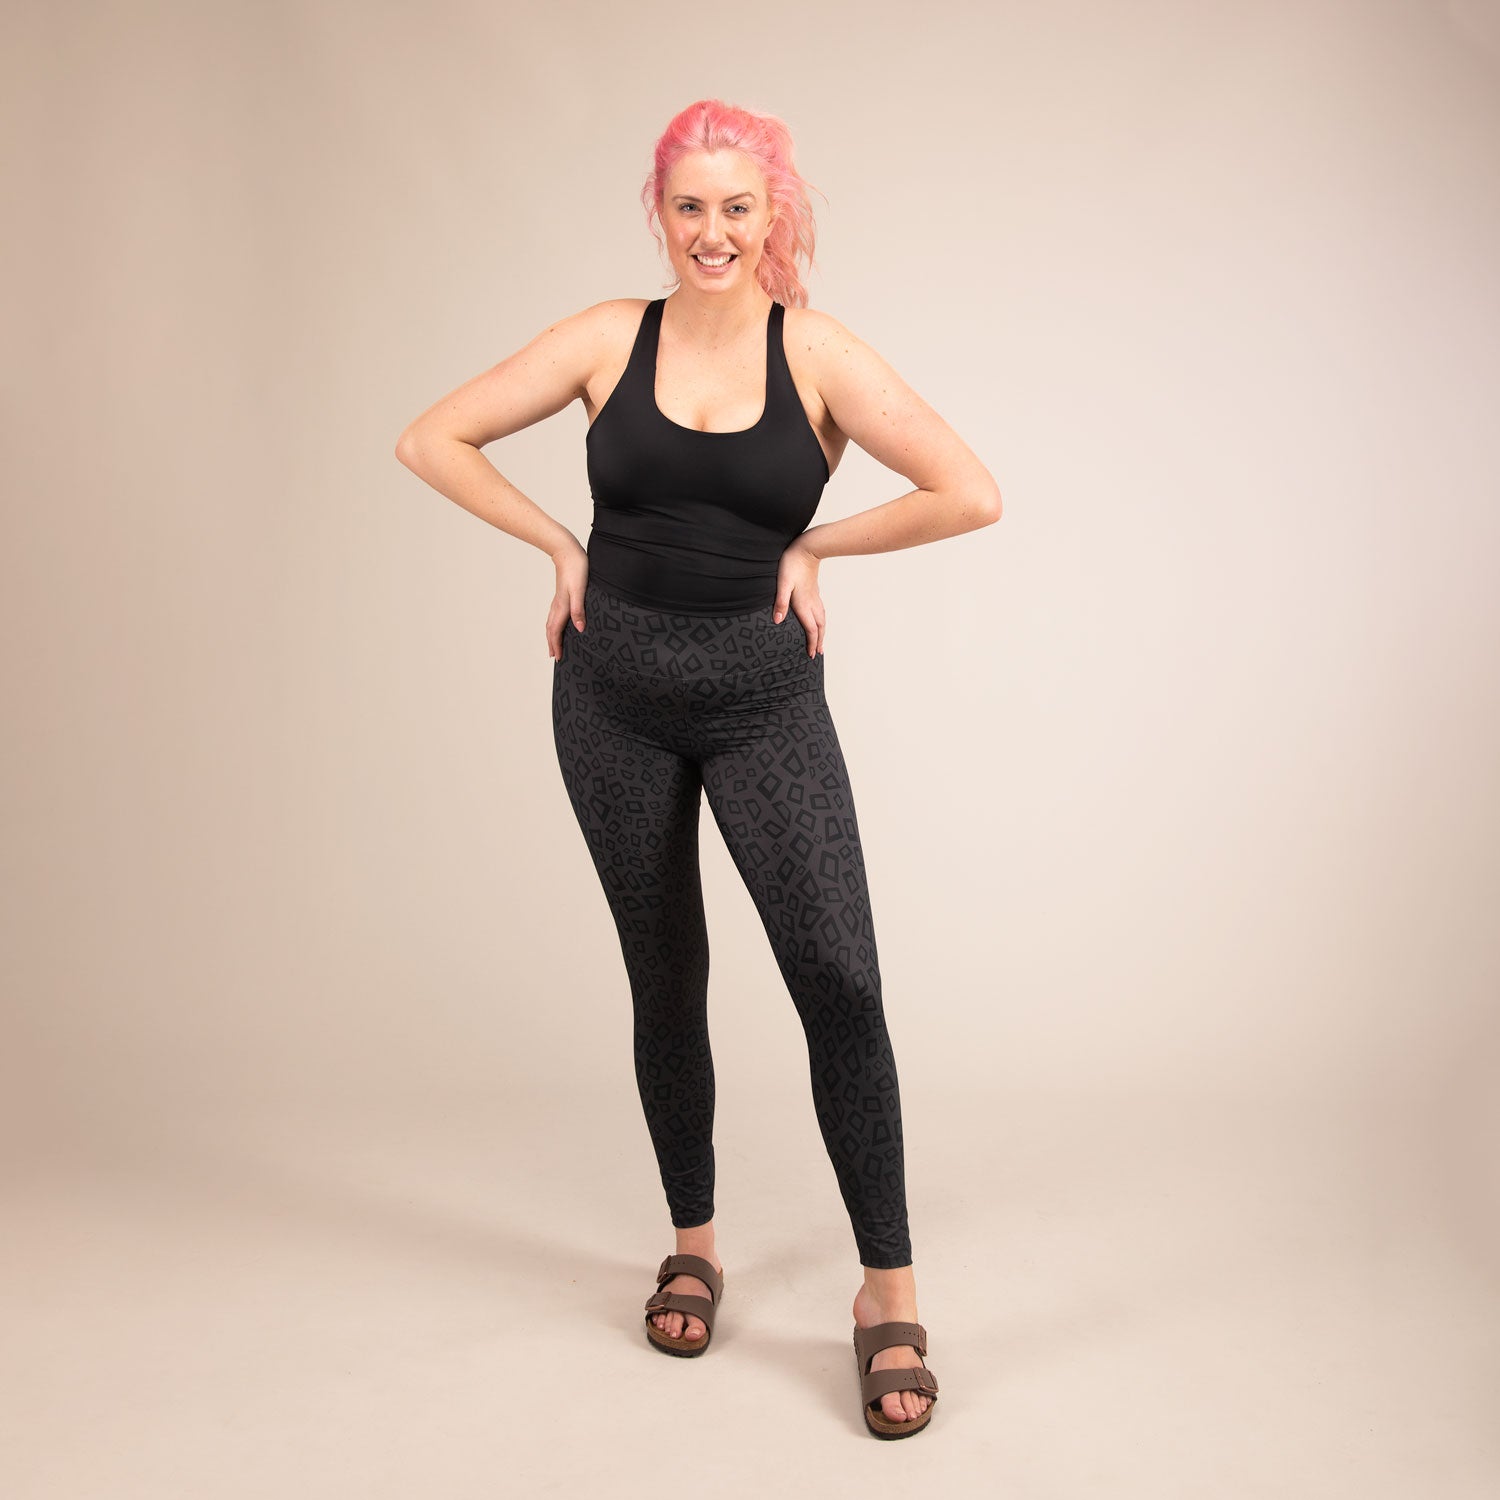 TITAN MINIMAL LEOPARD | Printed Recycled Leggings | 3RD ROCK Clothing -  Sophie is 5ft 9 with a 34" waist, 42" hips and wears a size 16 F